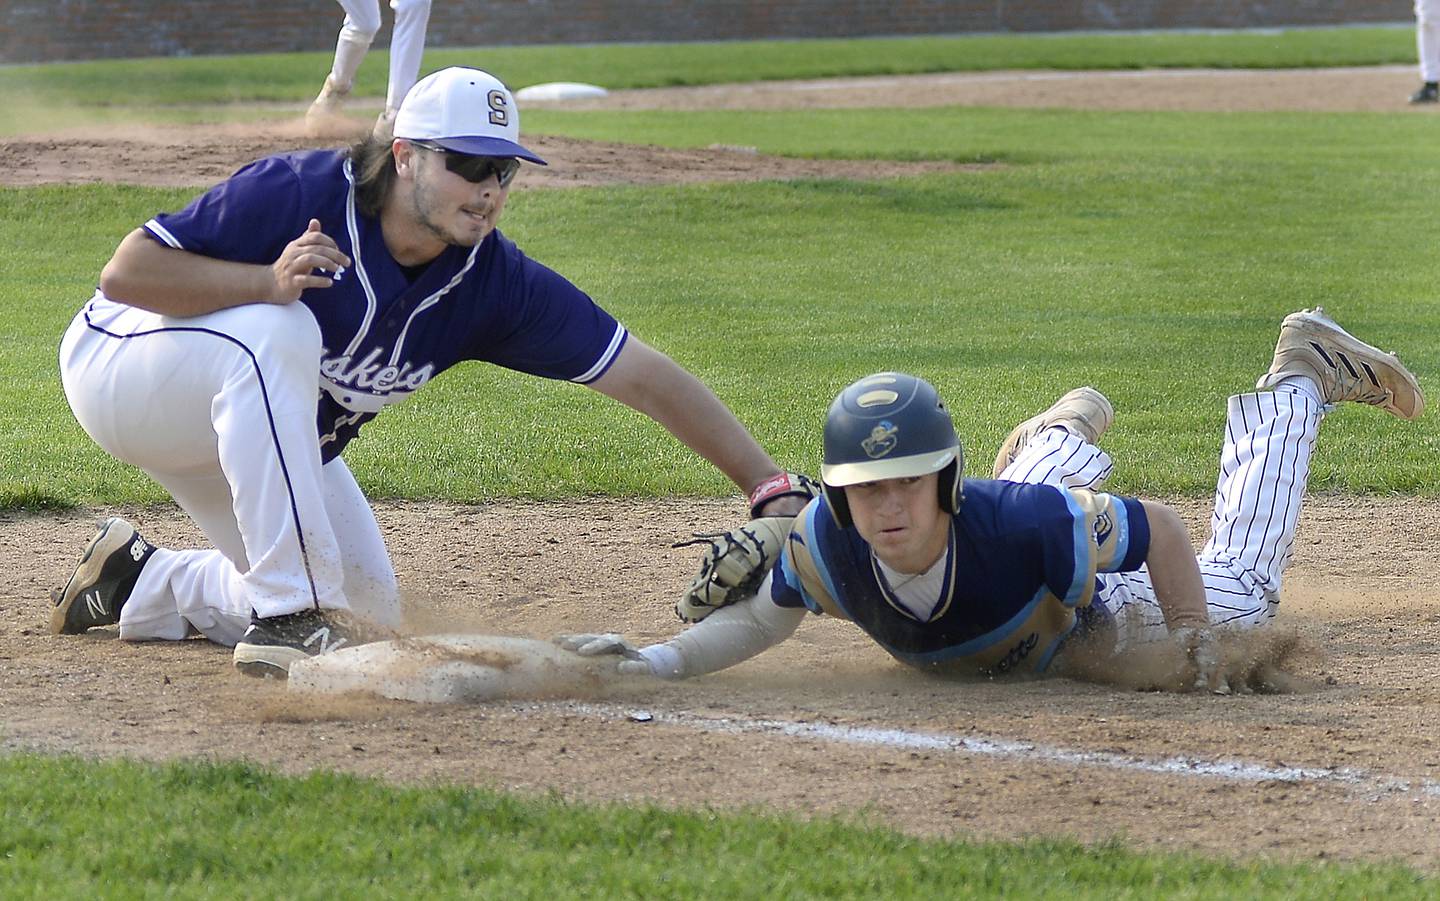 Marquette’s Carson Zellers makes it back to 1st as Serena’s Todd Smith applies the late tag on a pickoff attempt in the 5th inning on Wednesday, May 17, 2023 at Marquette.